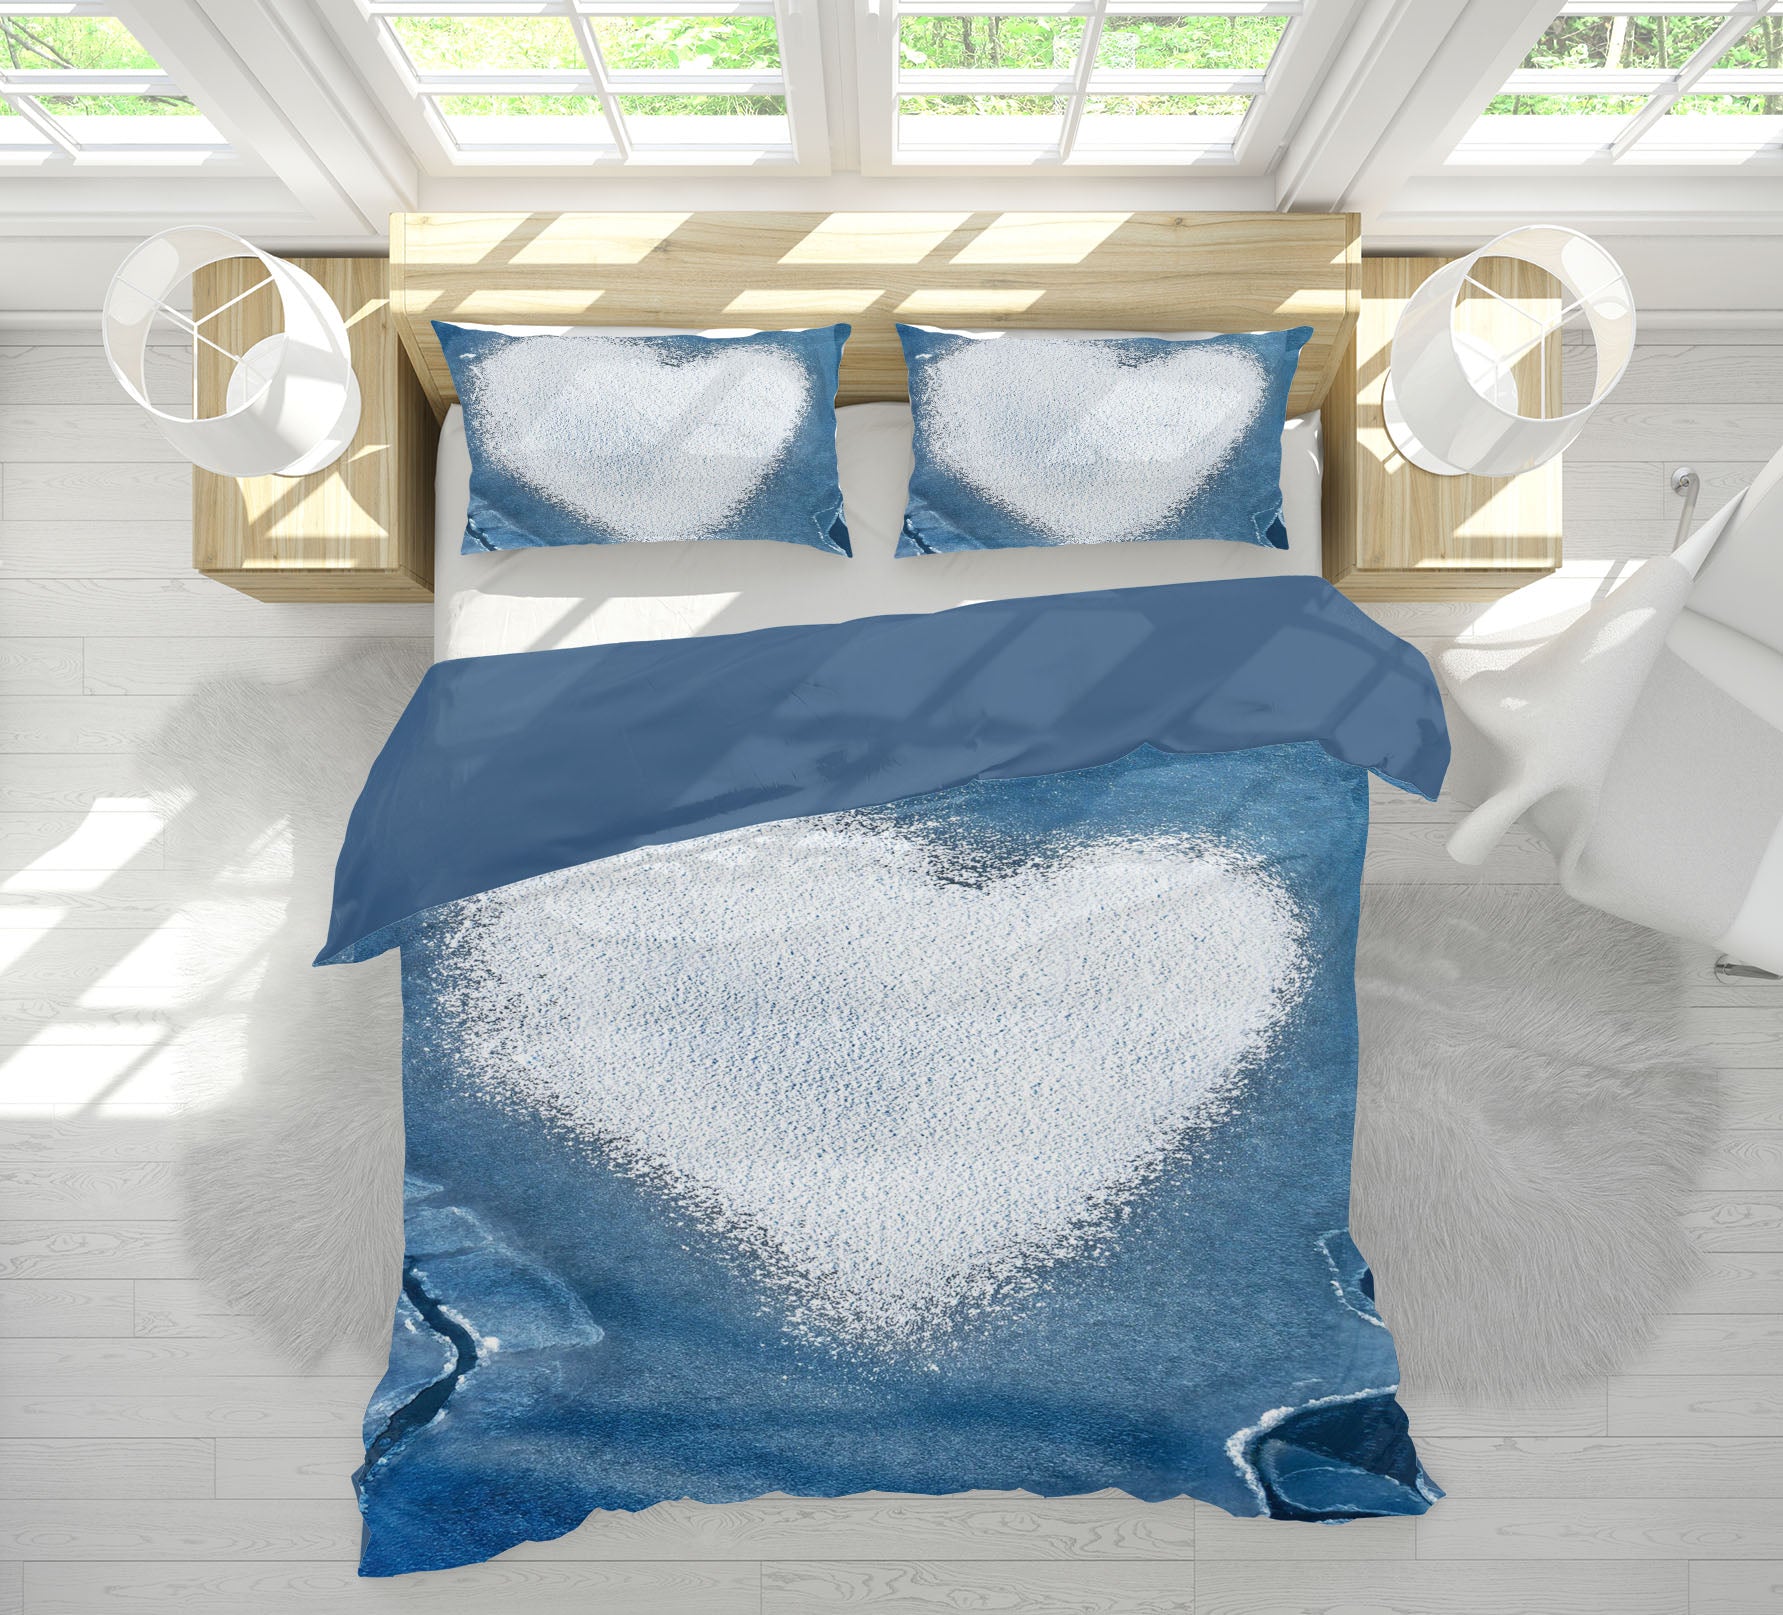 3D Heart Shaped White Cloud 2159 Marco Carmassi Bedding Bed Pillowcases Quilt